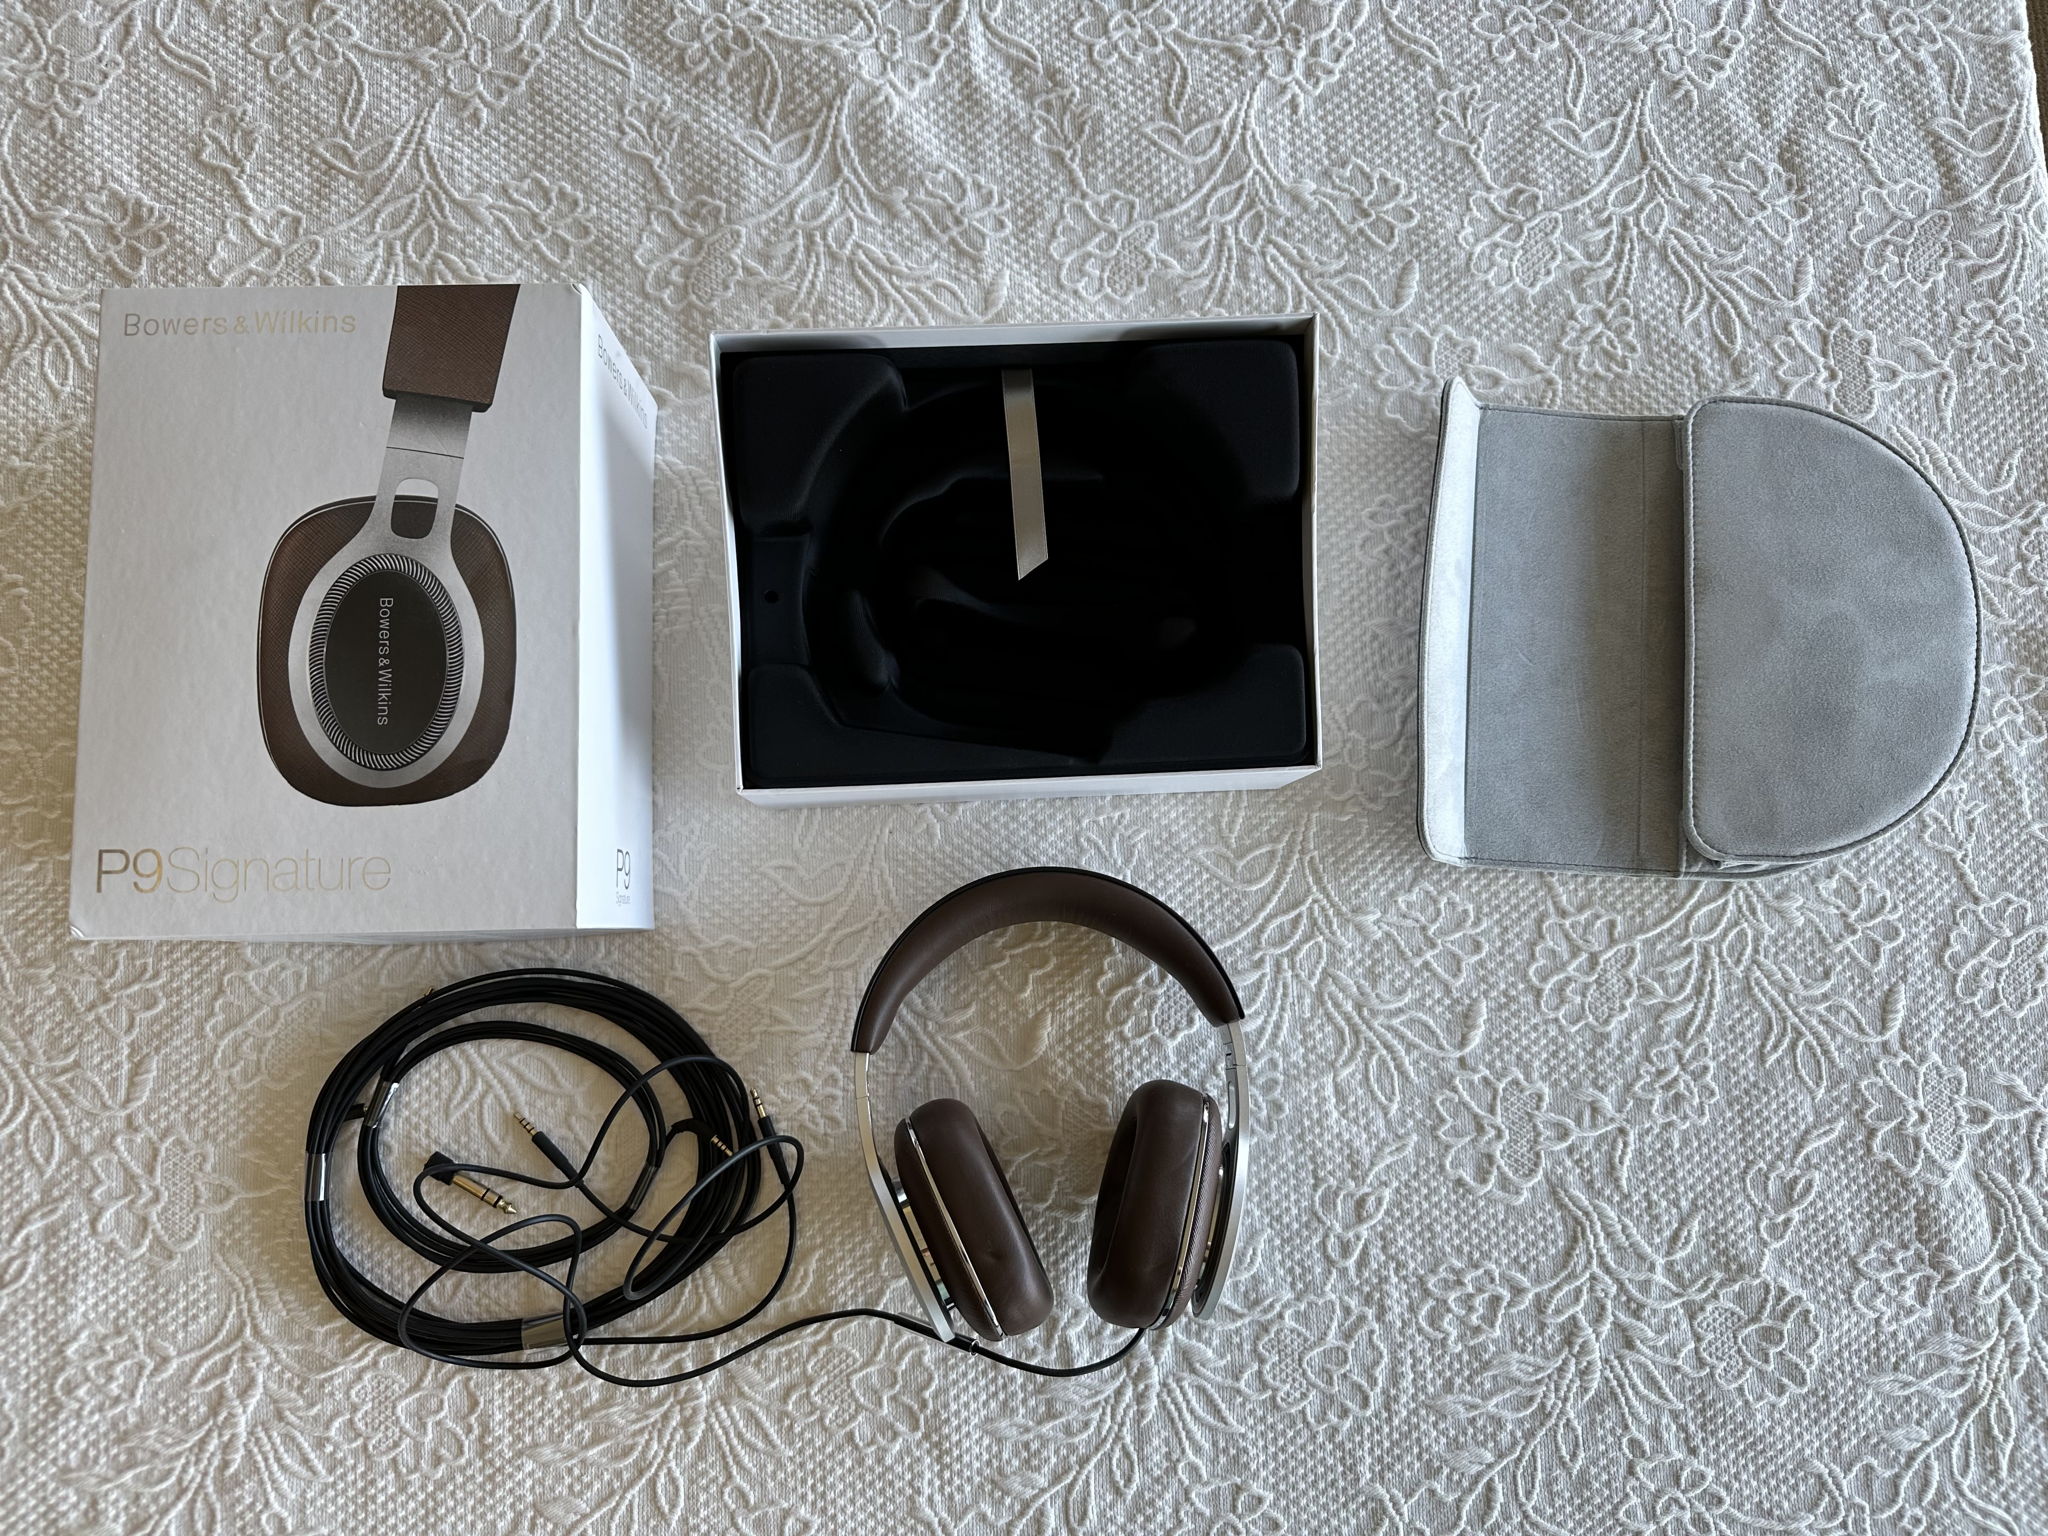 B&W (Bowers & Wilkins) P9 Signature For Sale | Audiogon